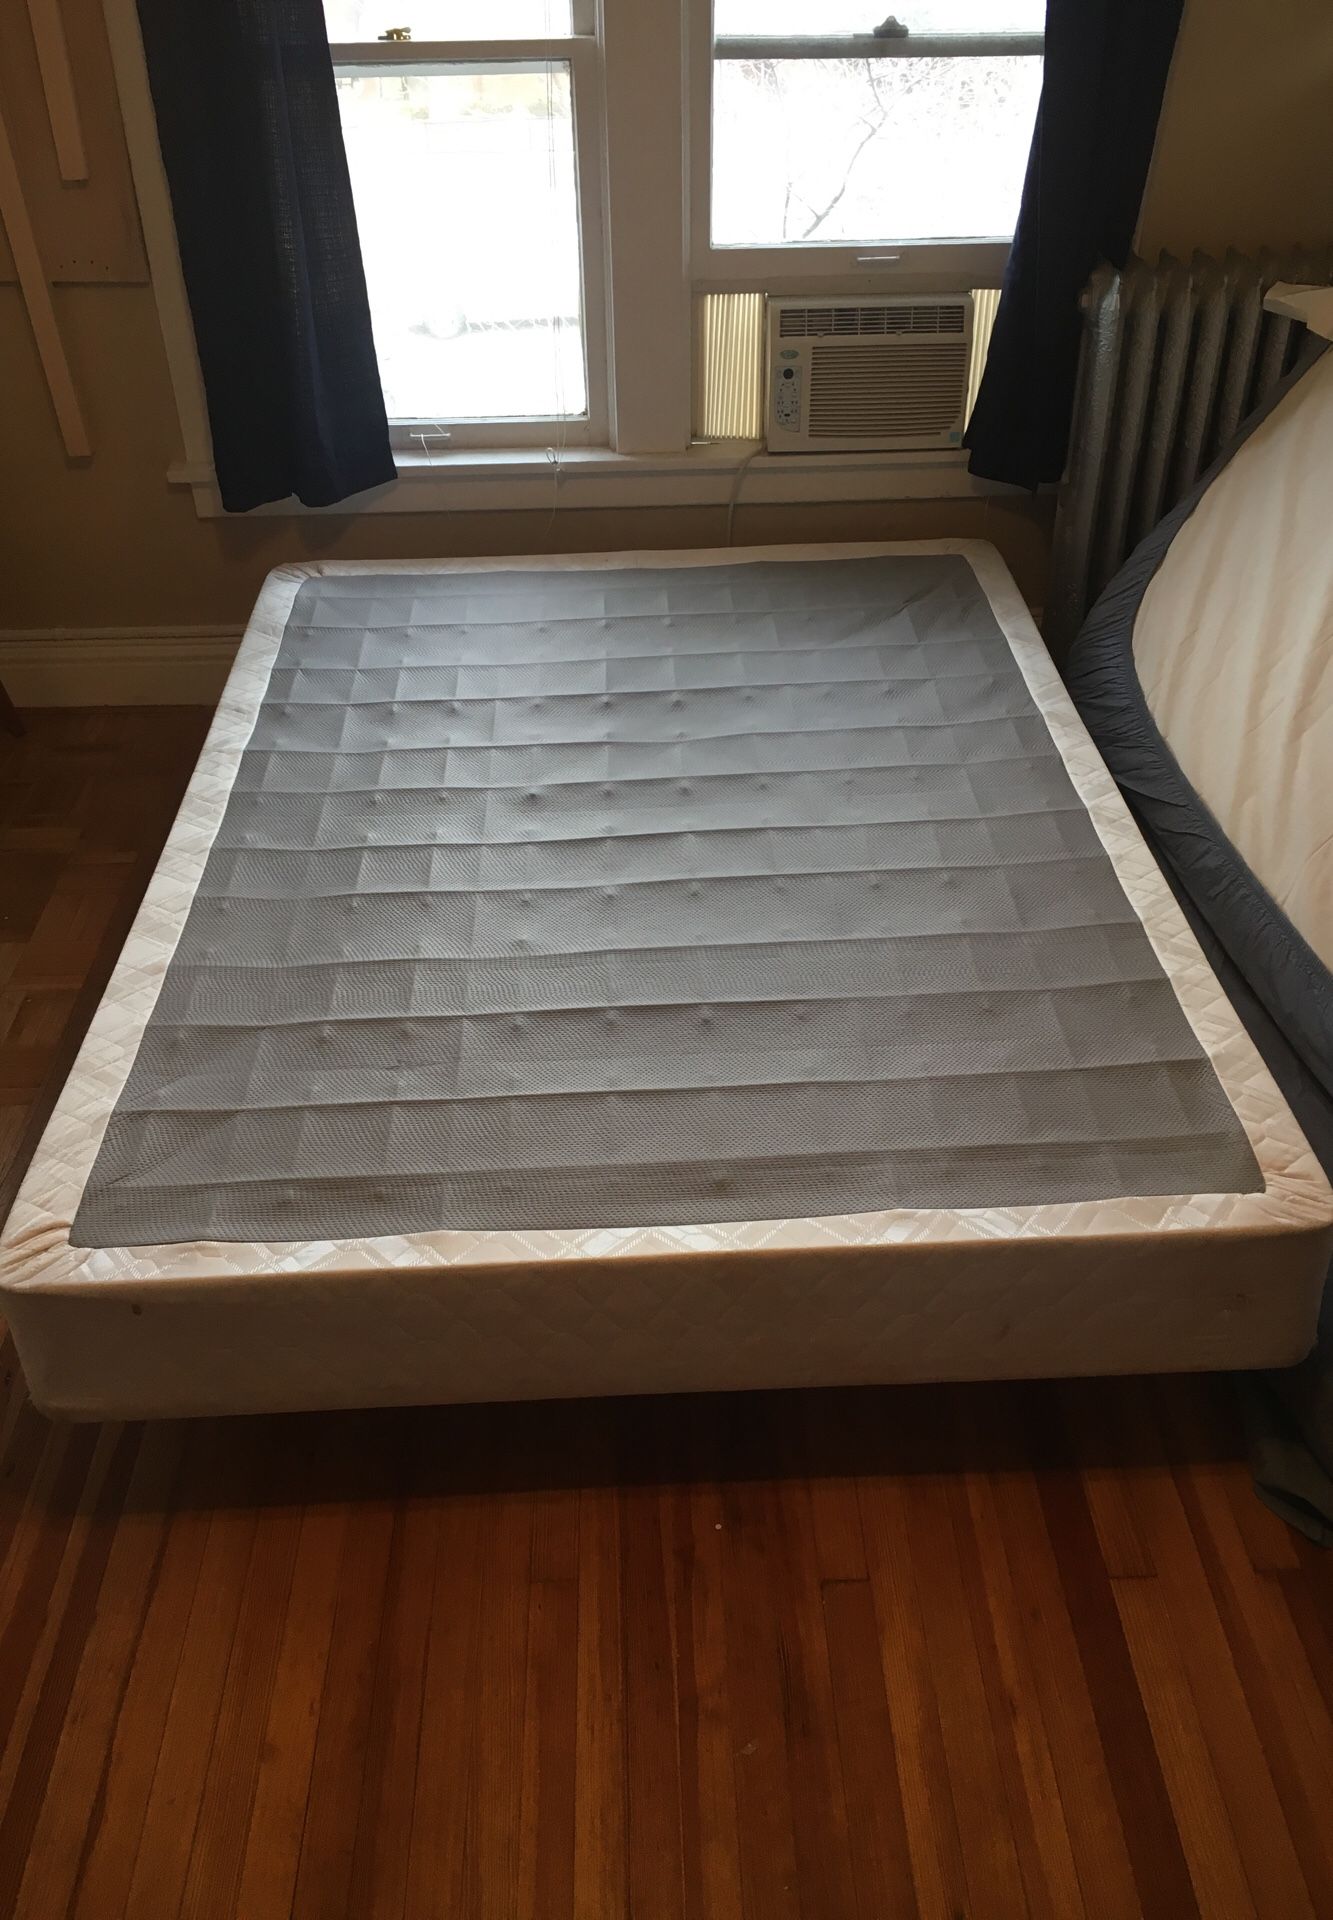 Queen size mattress box spring and frame